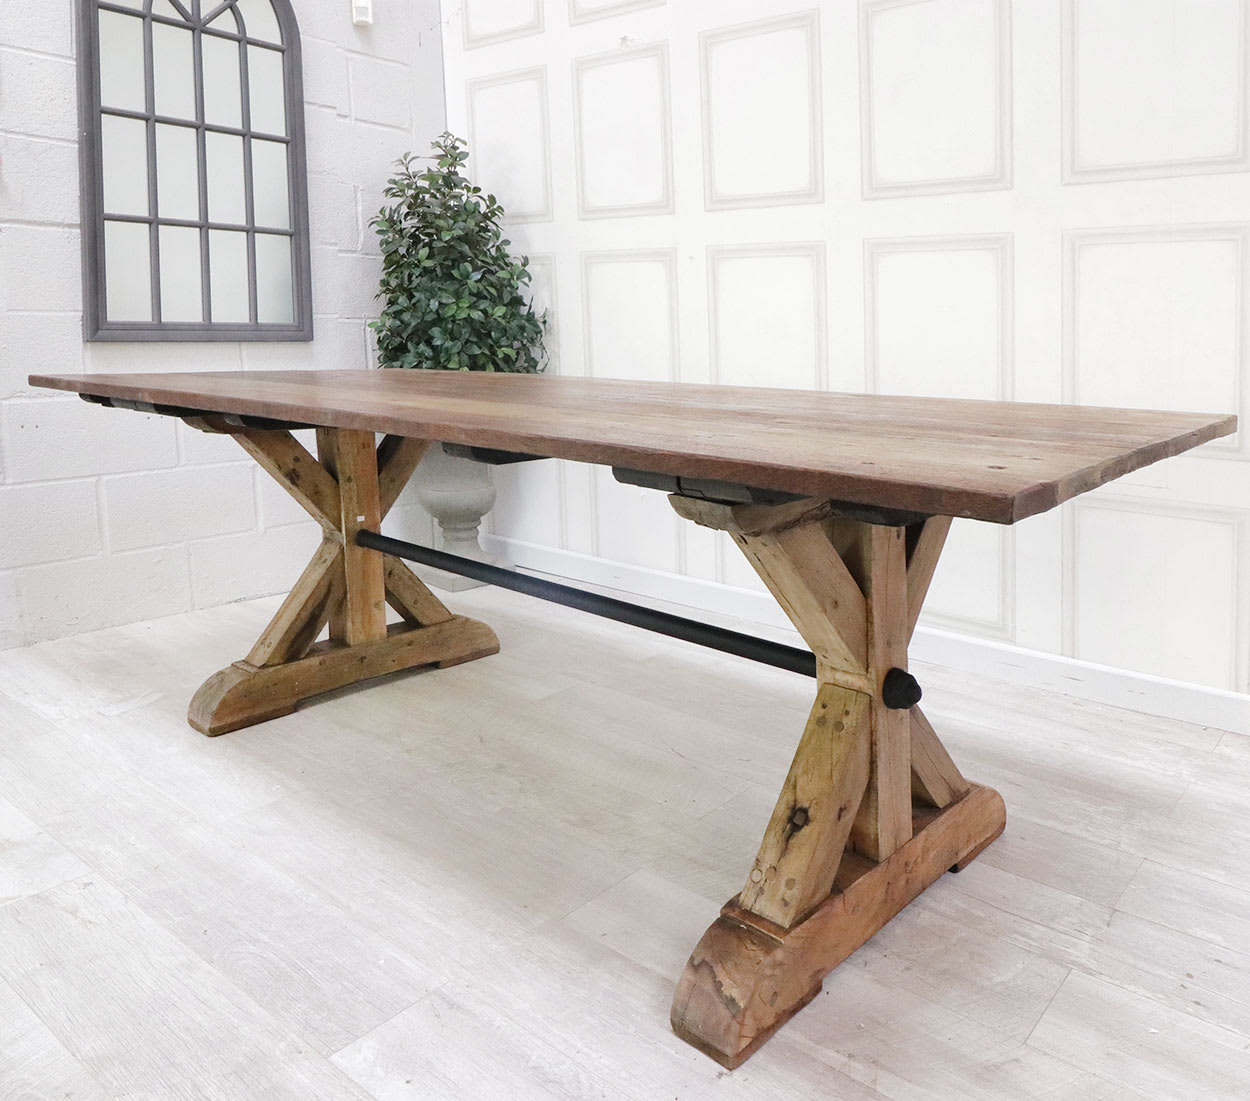 Ornate Leg with Tie Rod Dining Table